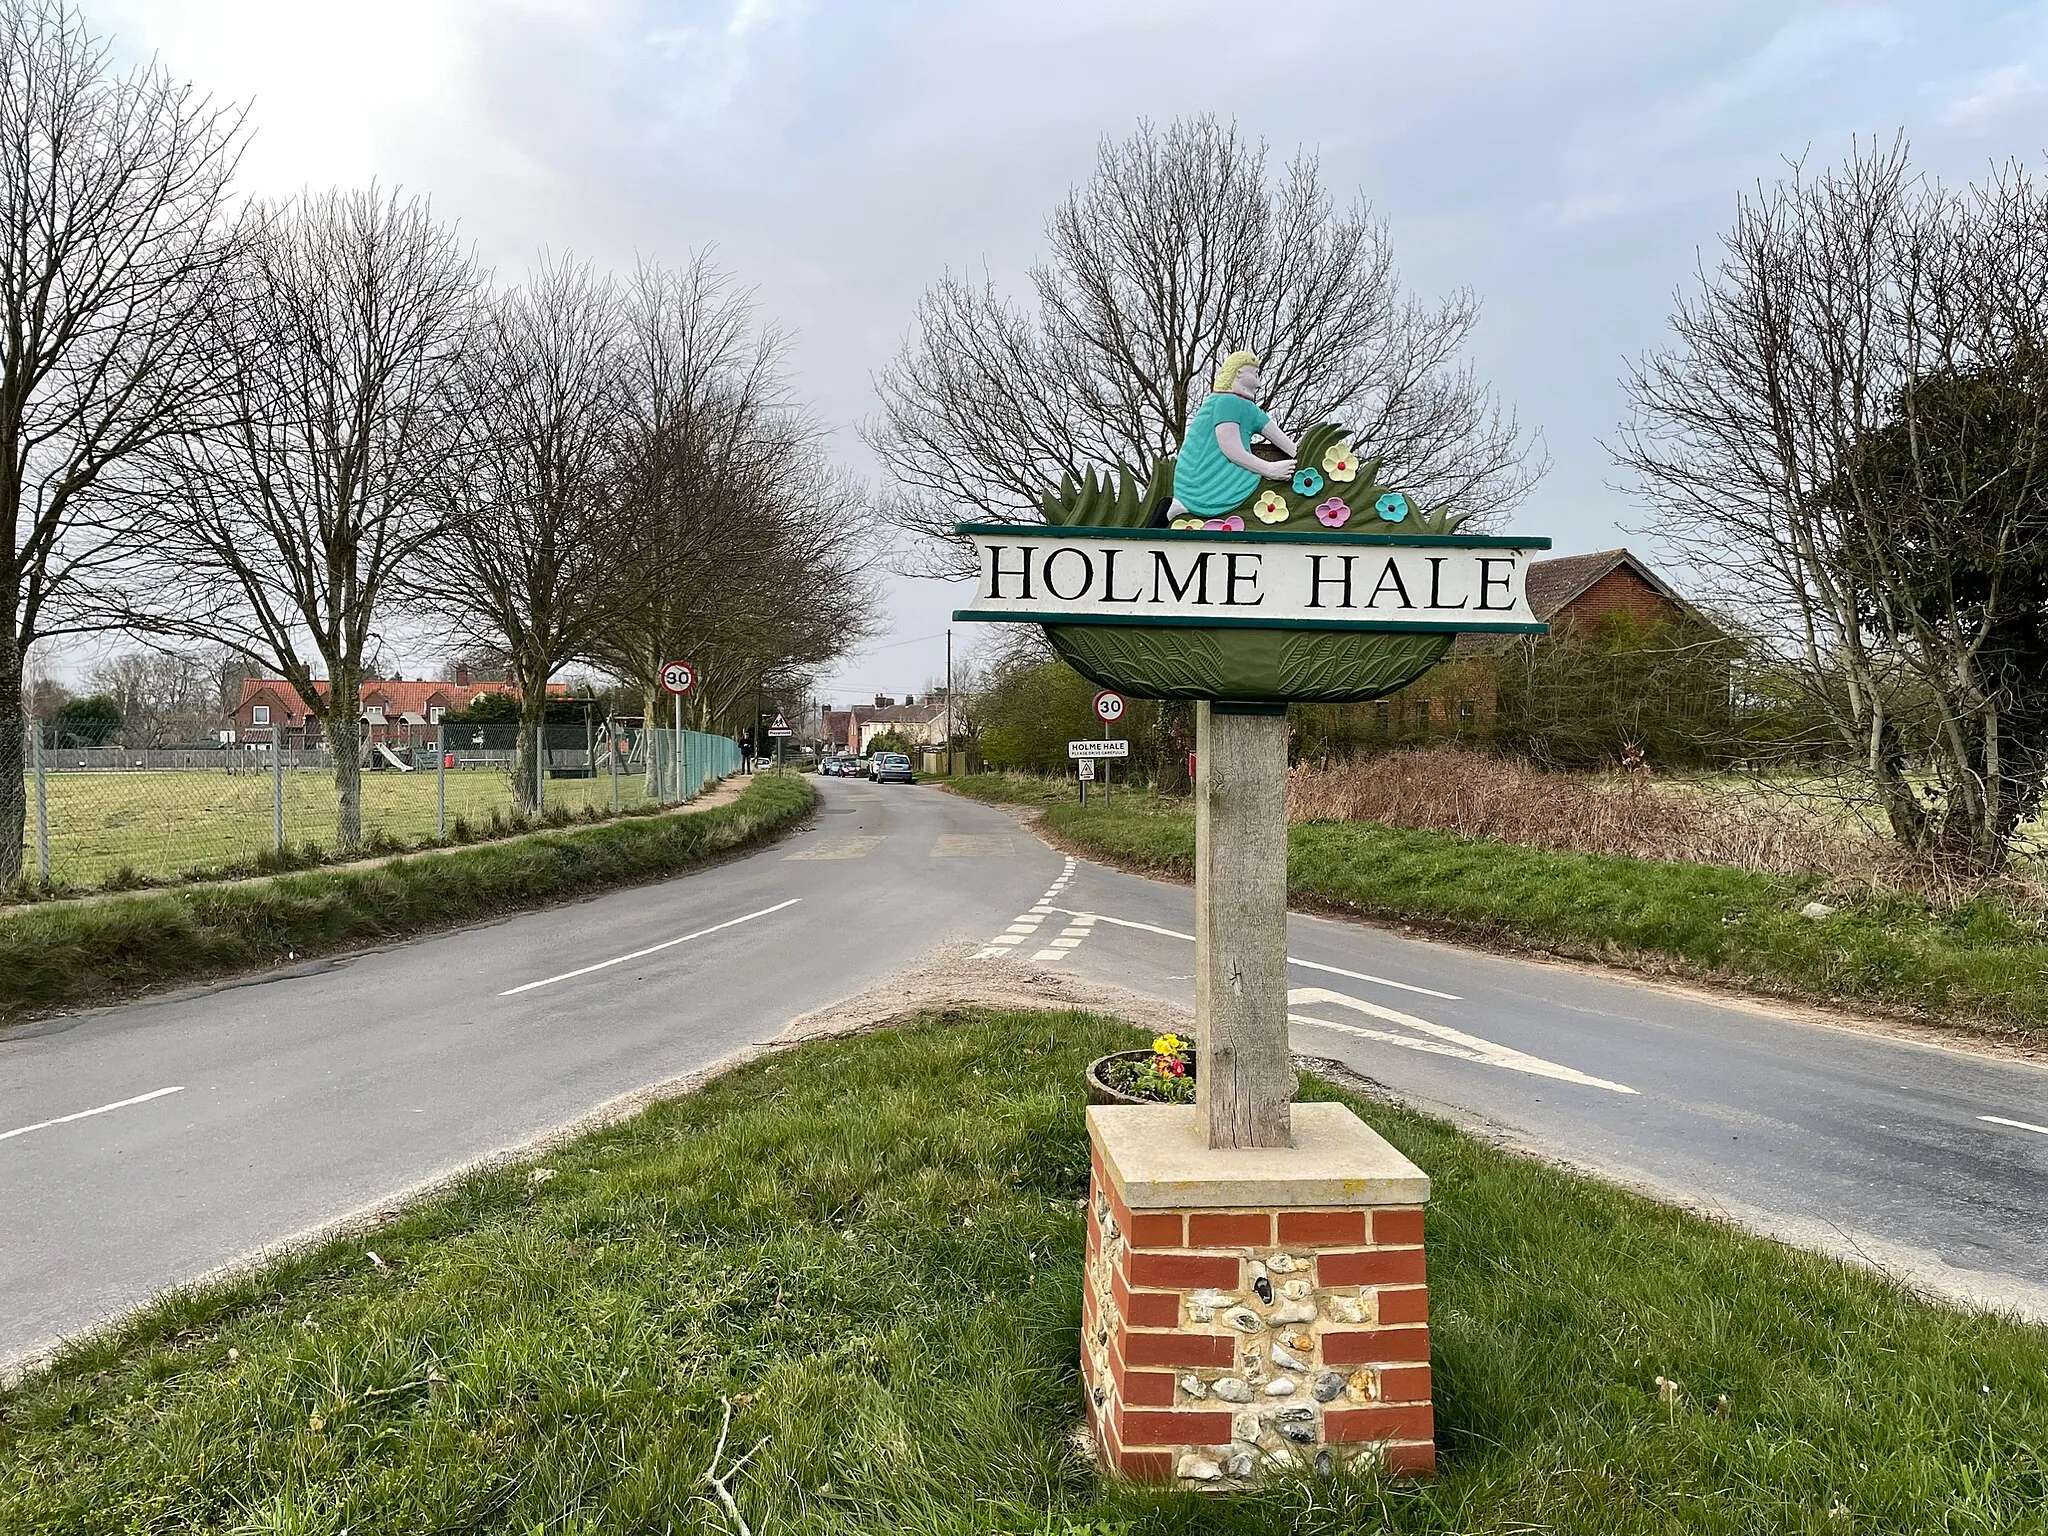 Photo showing: The sign at one of the entrances to the boundary of Holme Hale village, Norfolk, possibly demonstrating its participation in the british gardens scheme